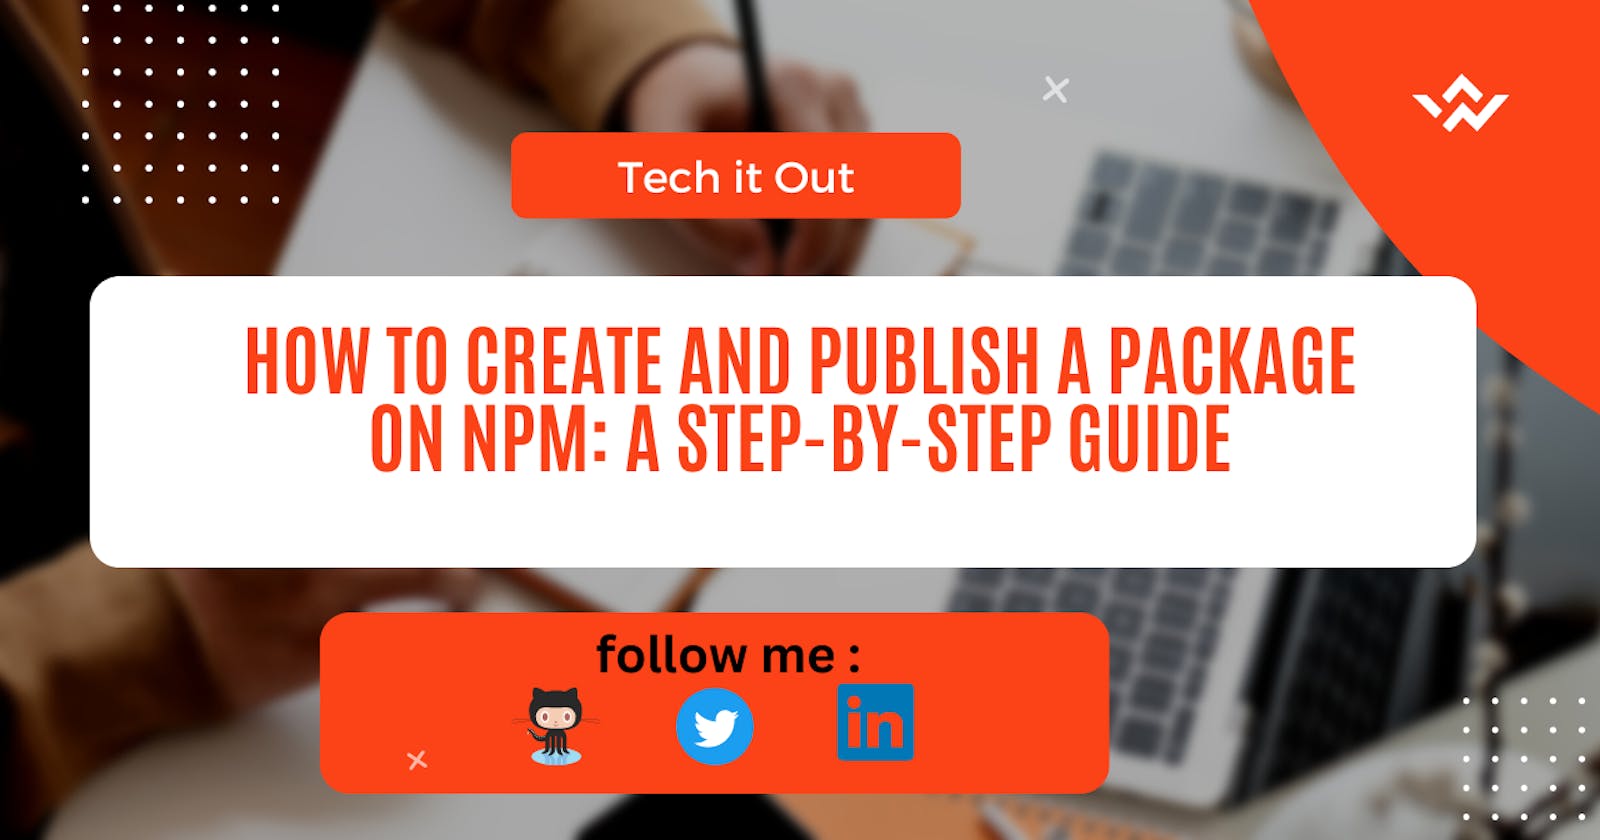 How to Create and Publish a Package on NPM: A Step-by-Step Guide